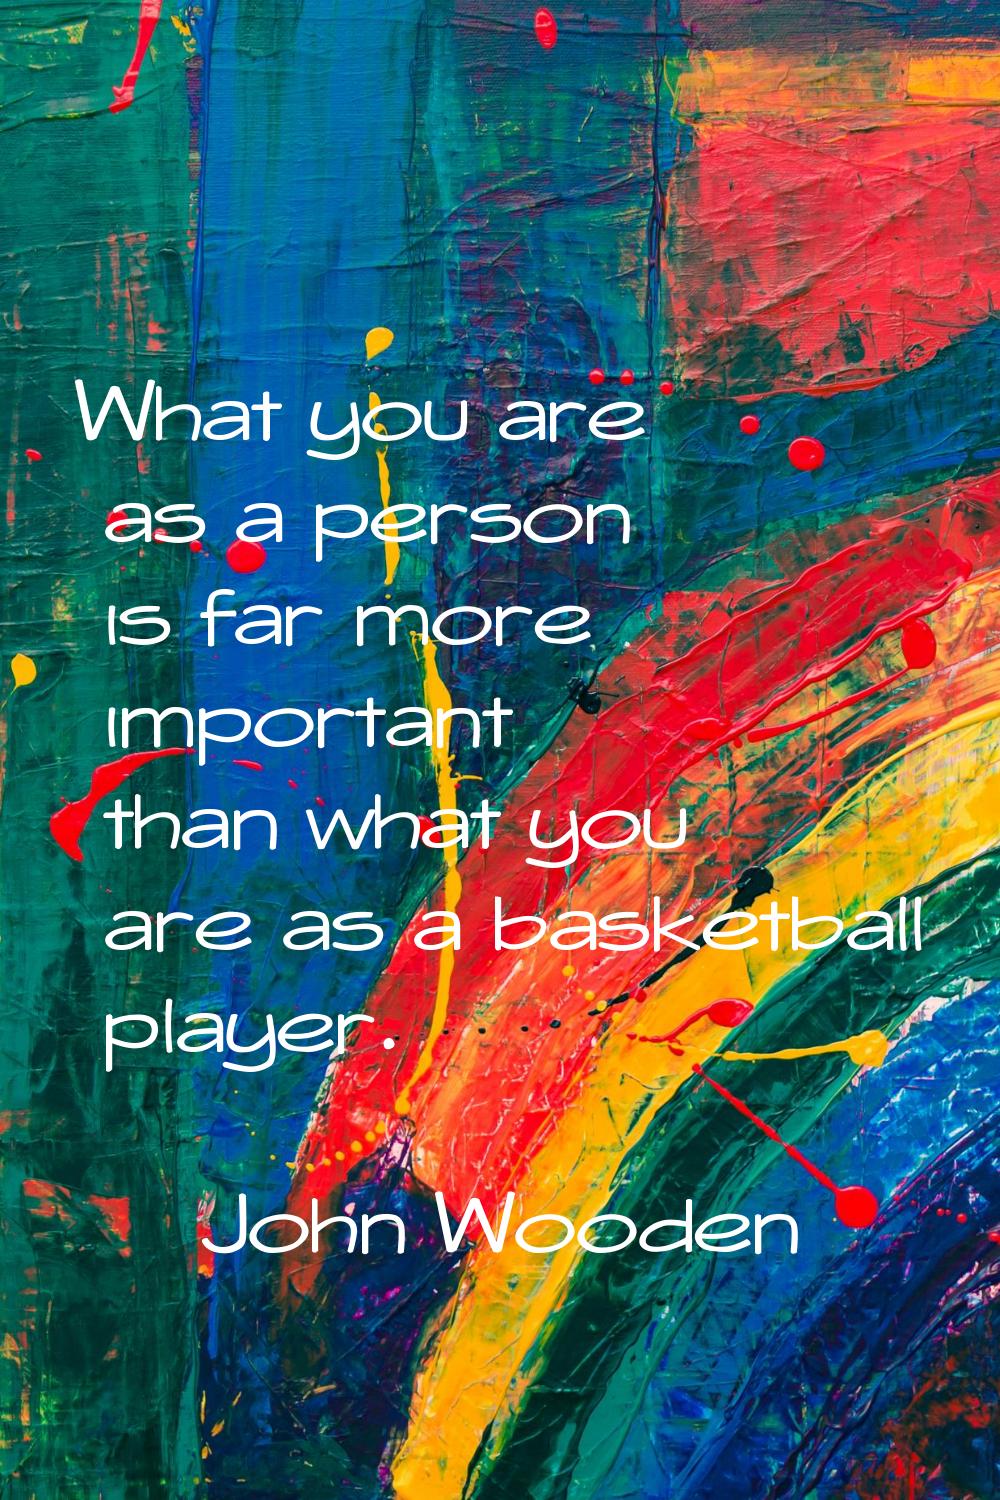 What you are as a person is far more important than what you are as a basketball player.